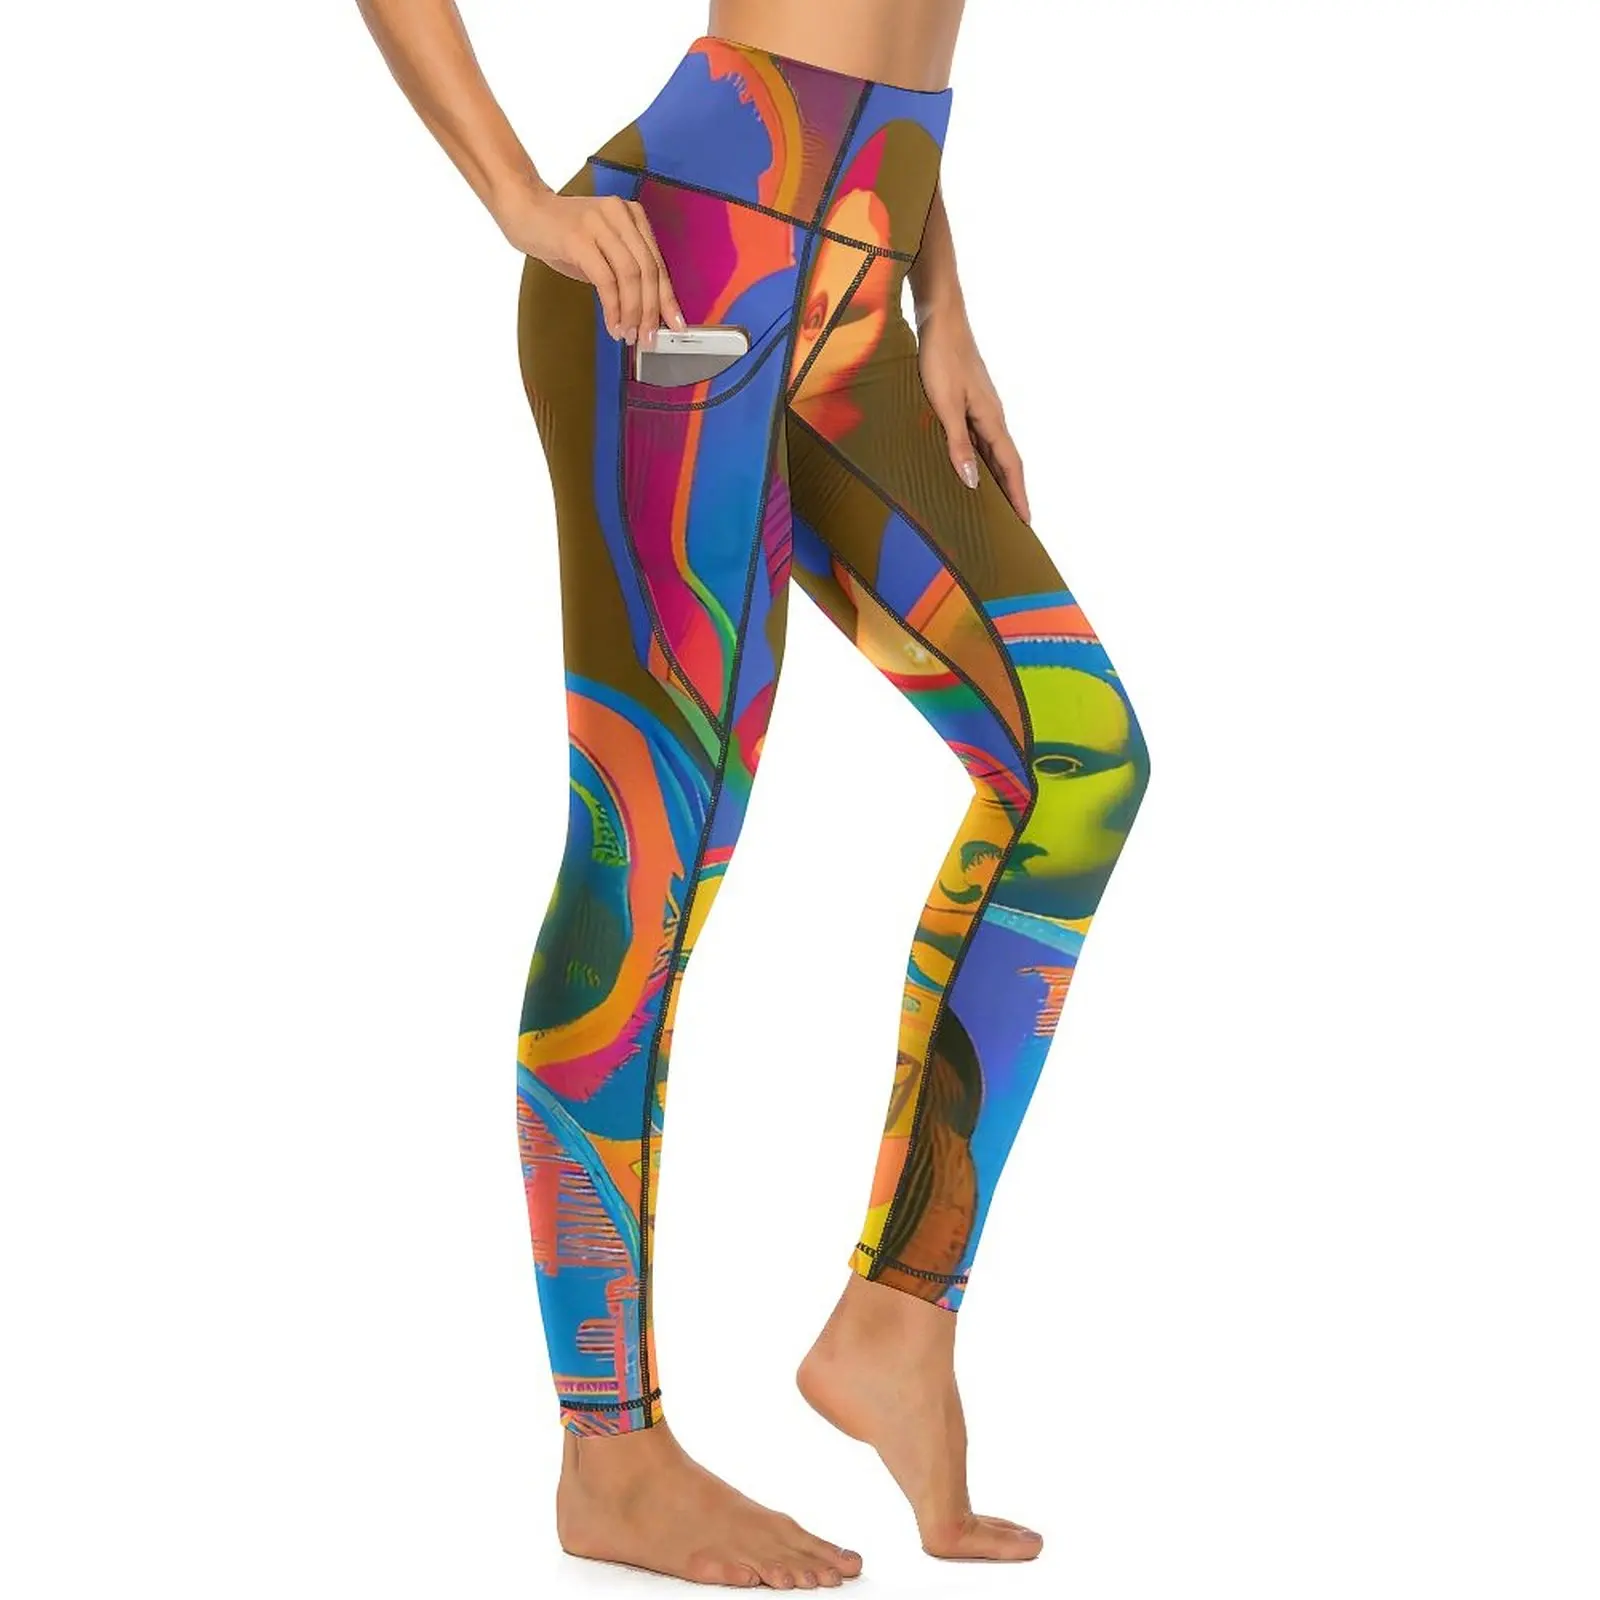 

Mona Lisa Yoga Pants Sexy Colorful Art Design Leggings High Waist Workout Leggins Lady Breathable Quick-Dry Sports Tights